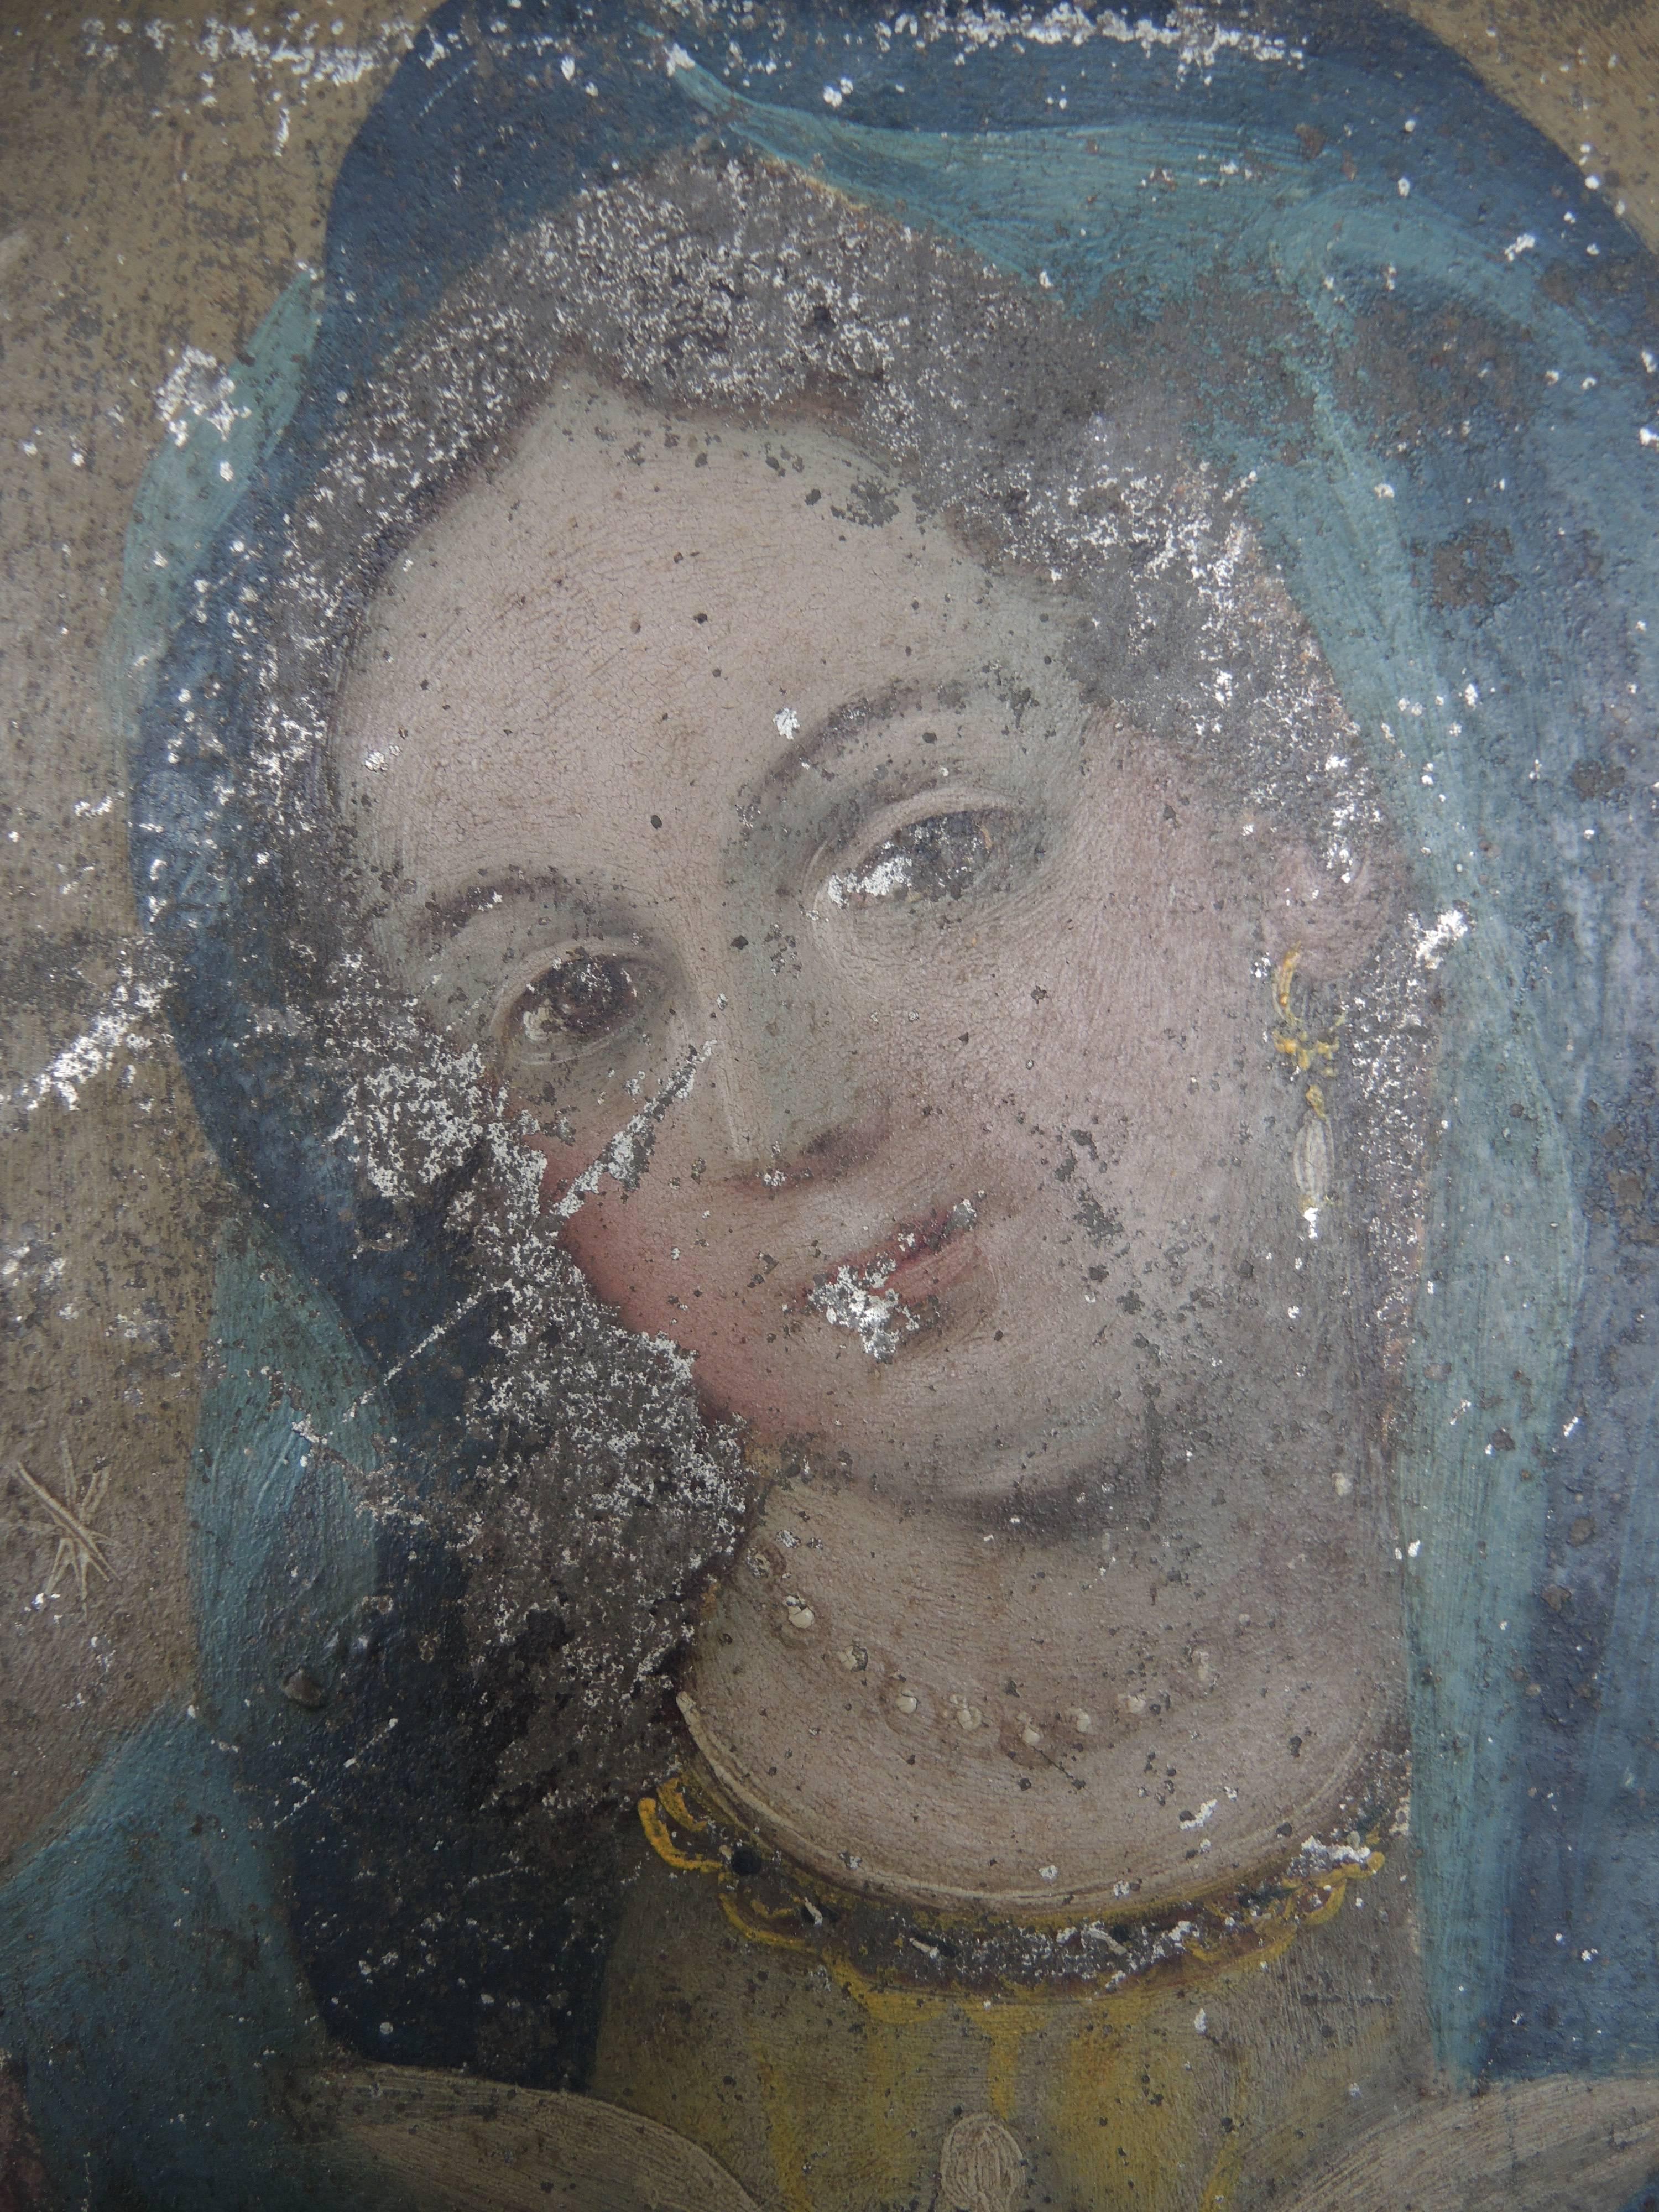 Lovely 19th century folk retablo painting on tin of Maria. Original paint without any restoration or in painting.